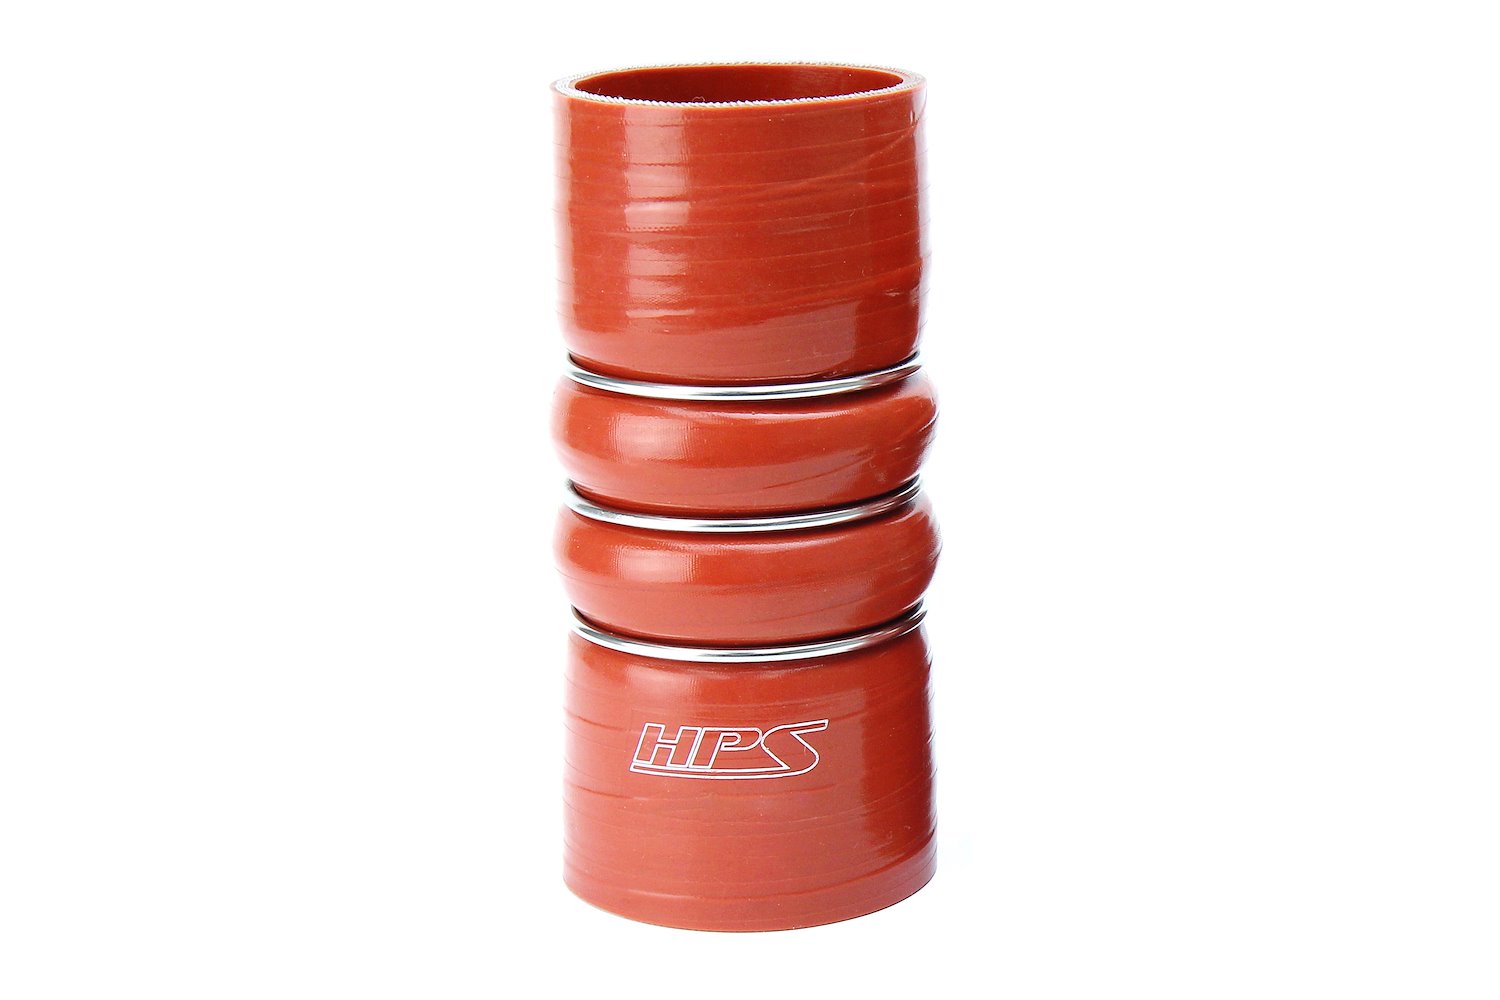 P8-CAC-700-L10-HOT Silicone CAC Hump Hose Hot, High-Temp 8-Ply Aramid Reinforced, 7 in. ID, 10 in. Long